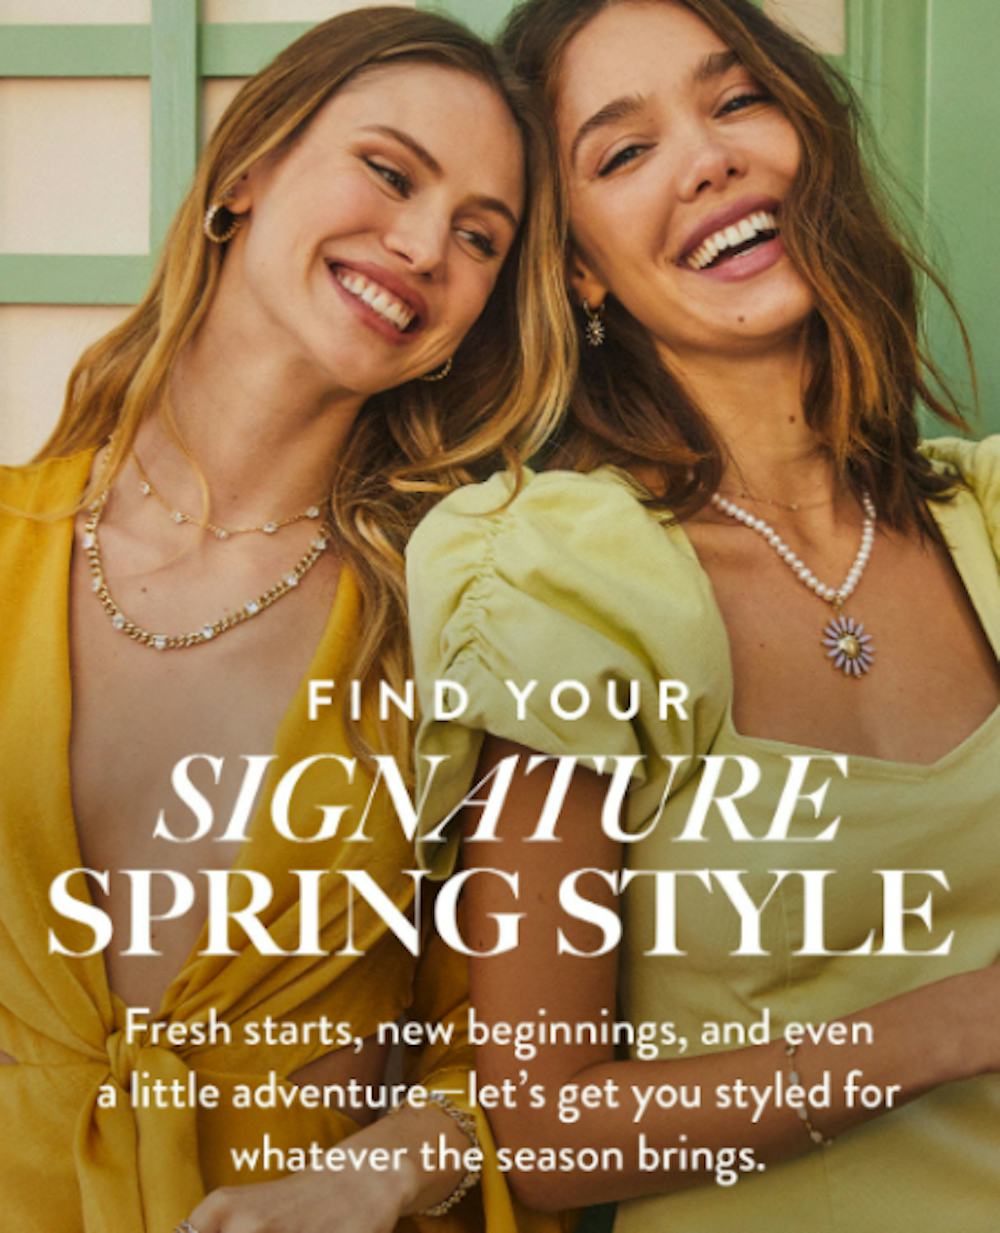 Find Your Signature Spring Style